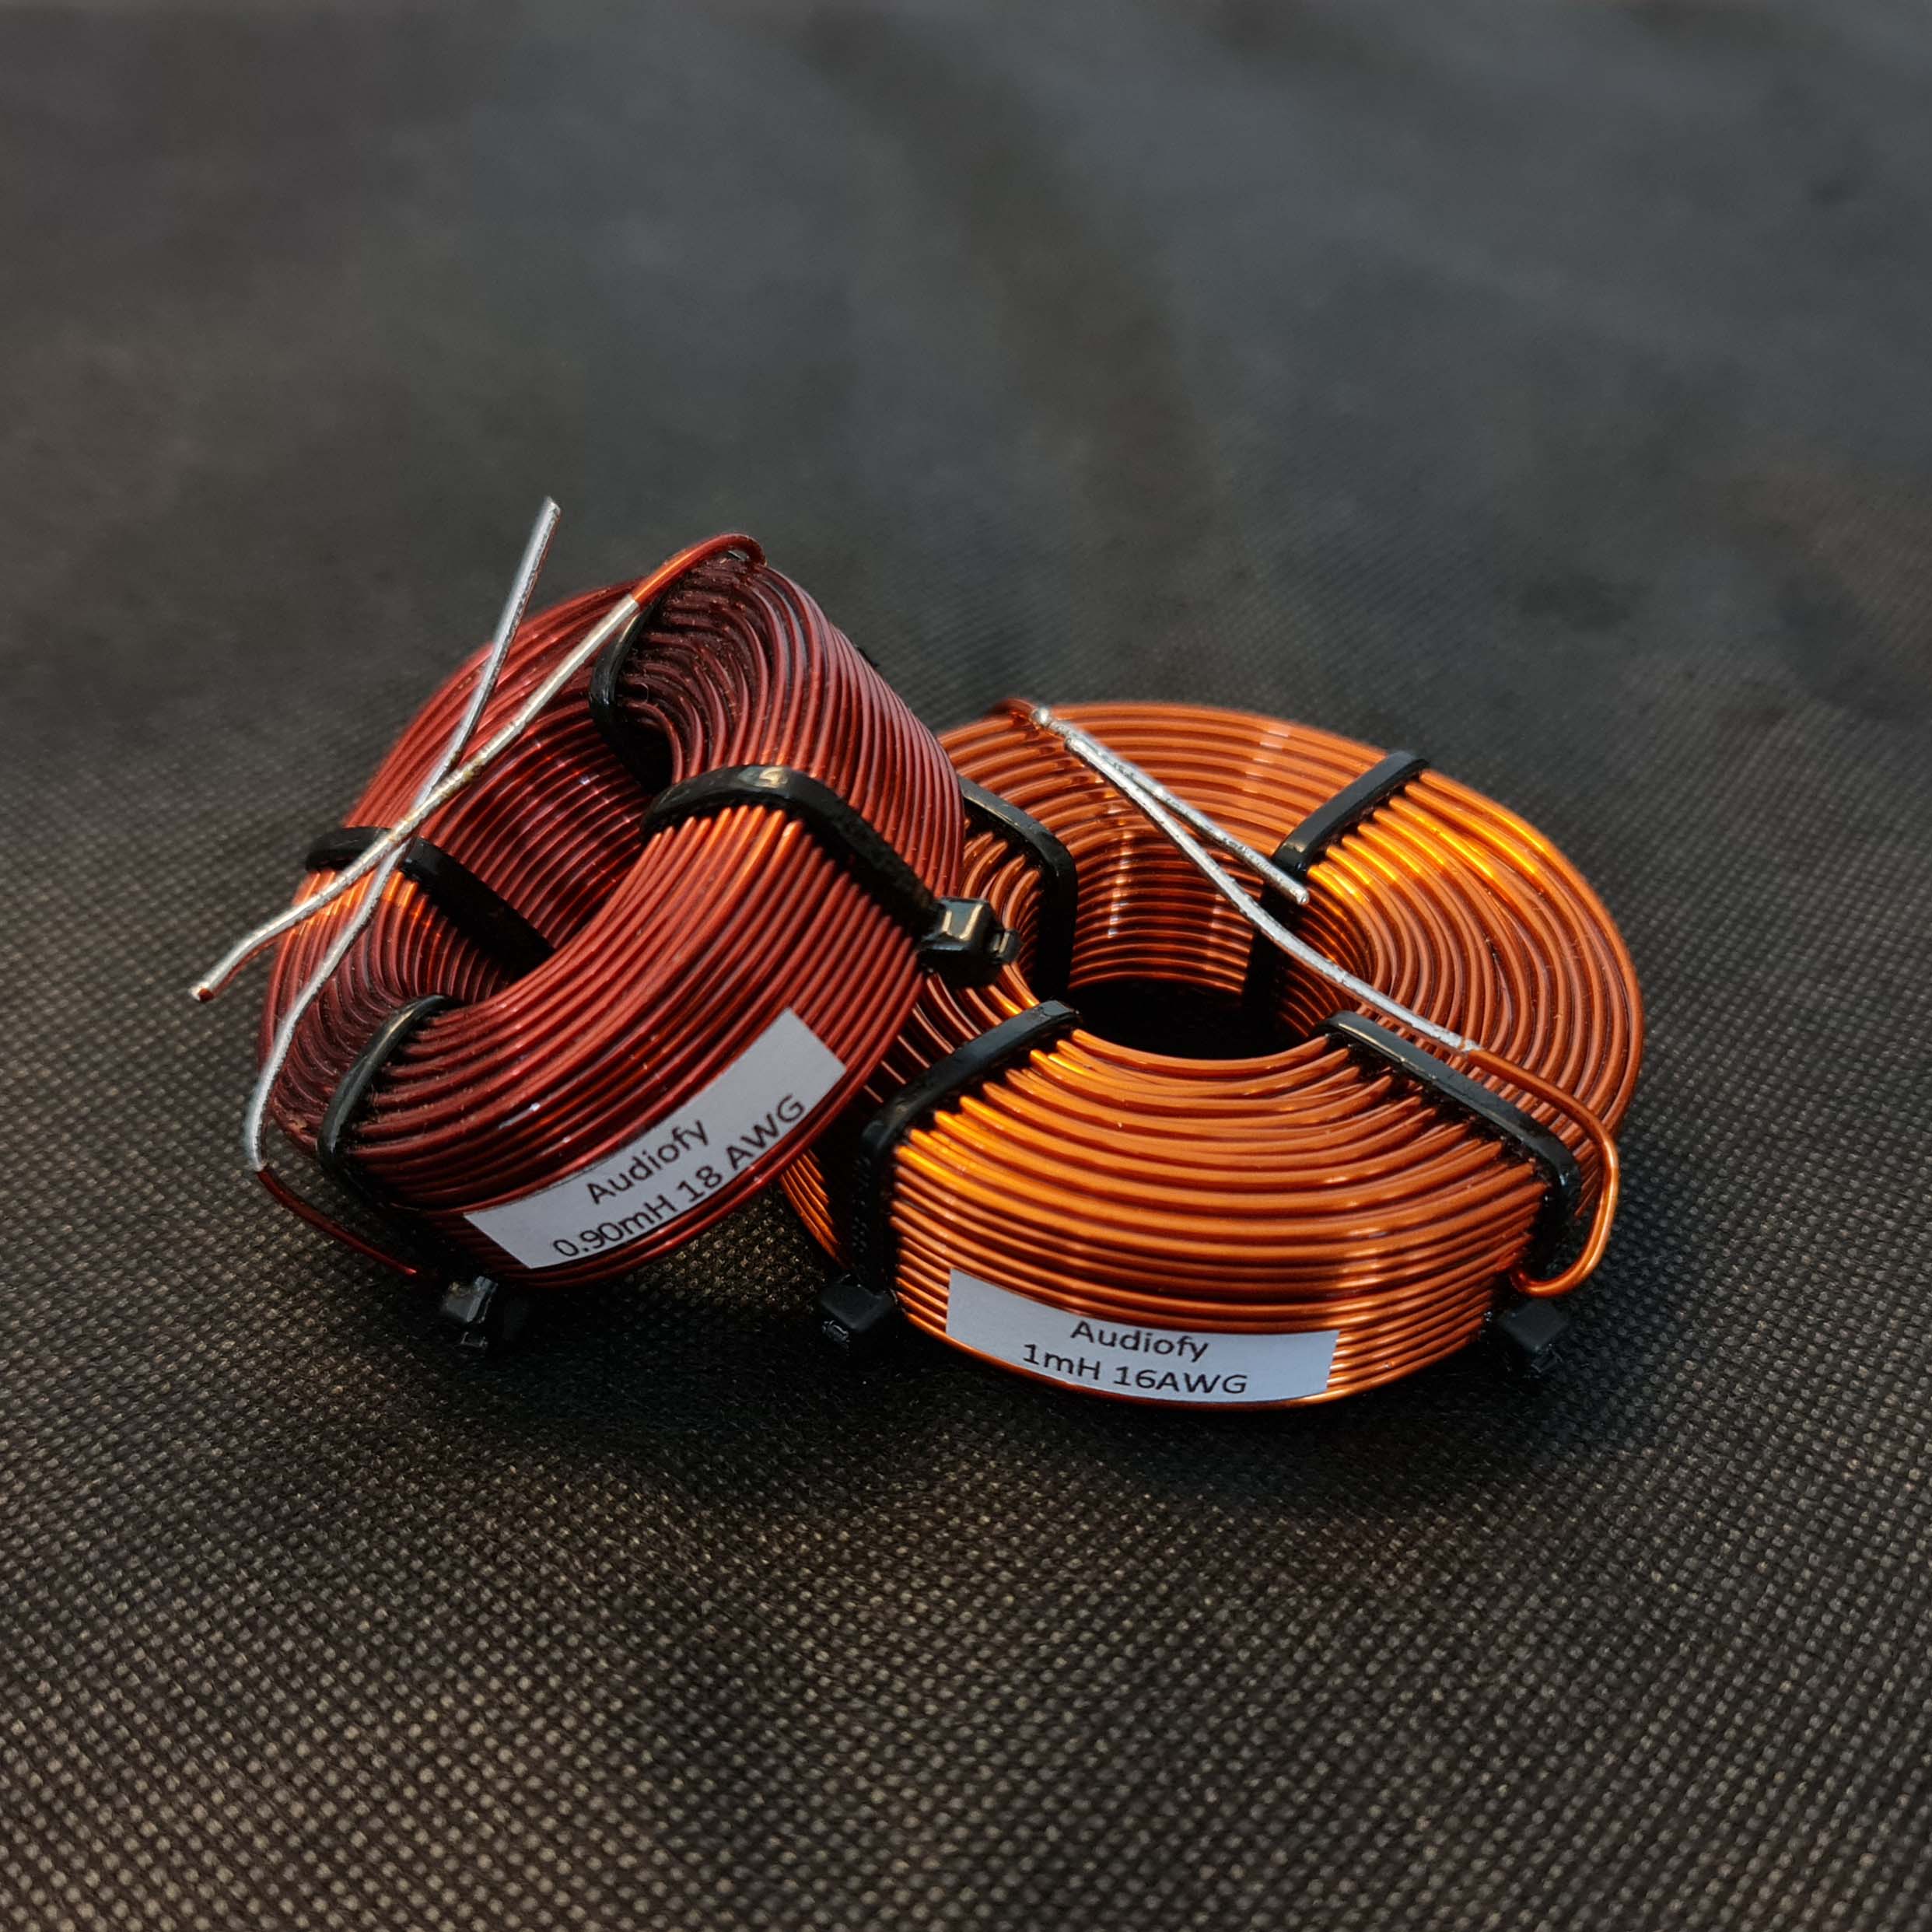 Audiofy 1.5mH 18 AWG Air Core Crossover Inductor